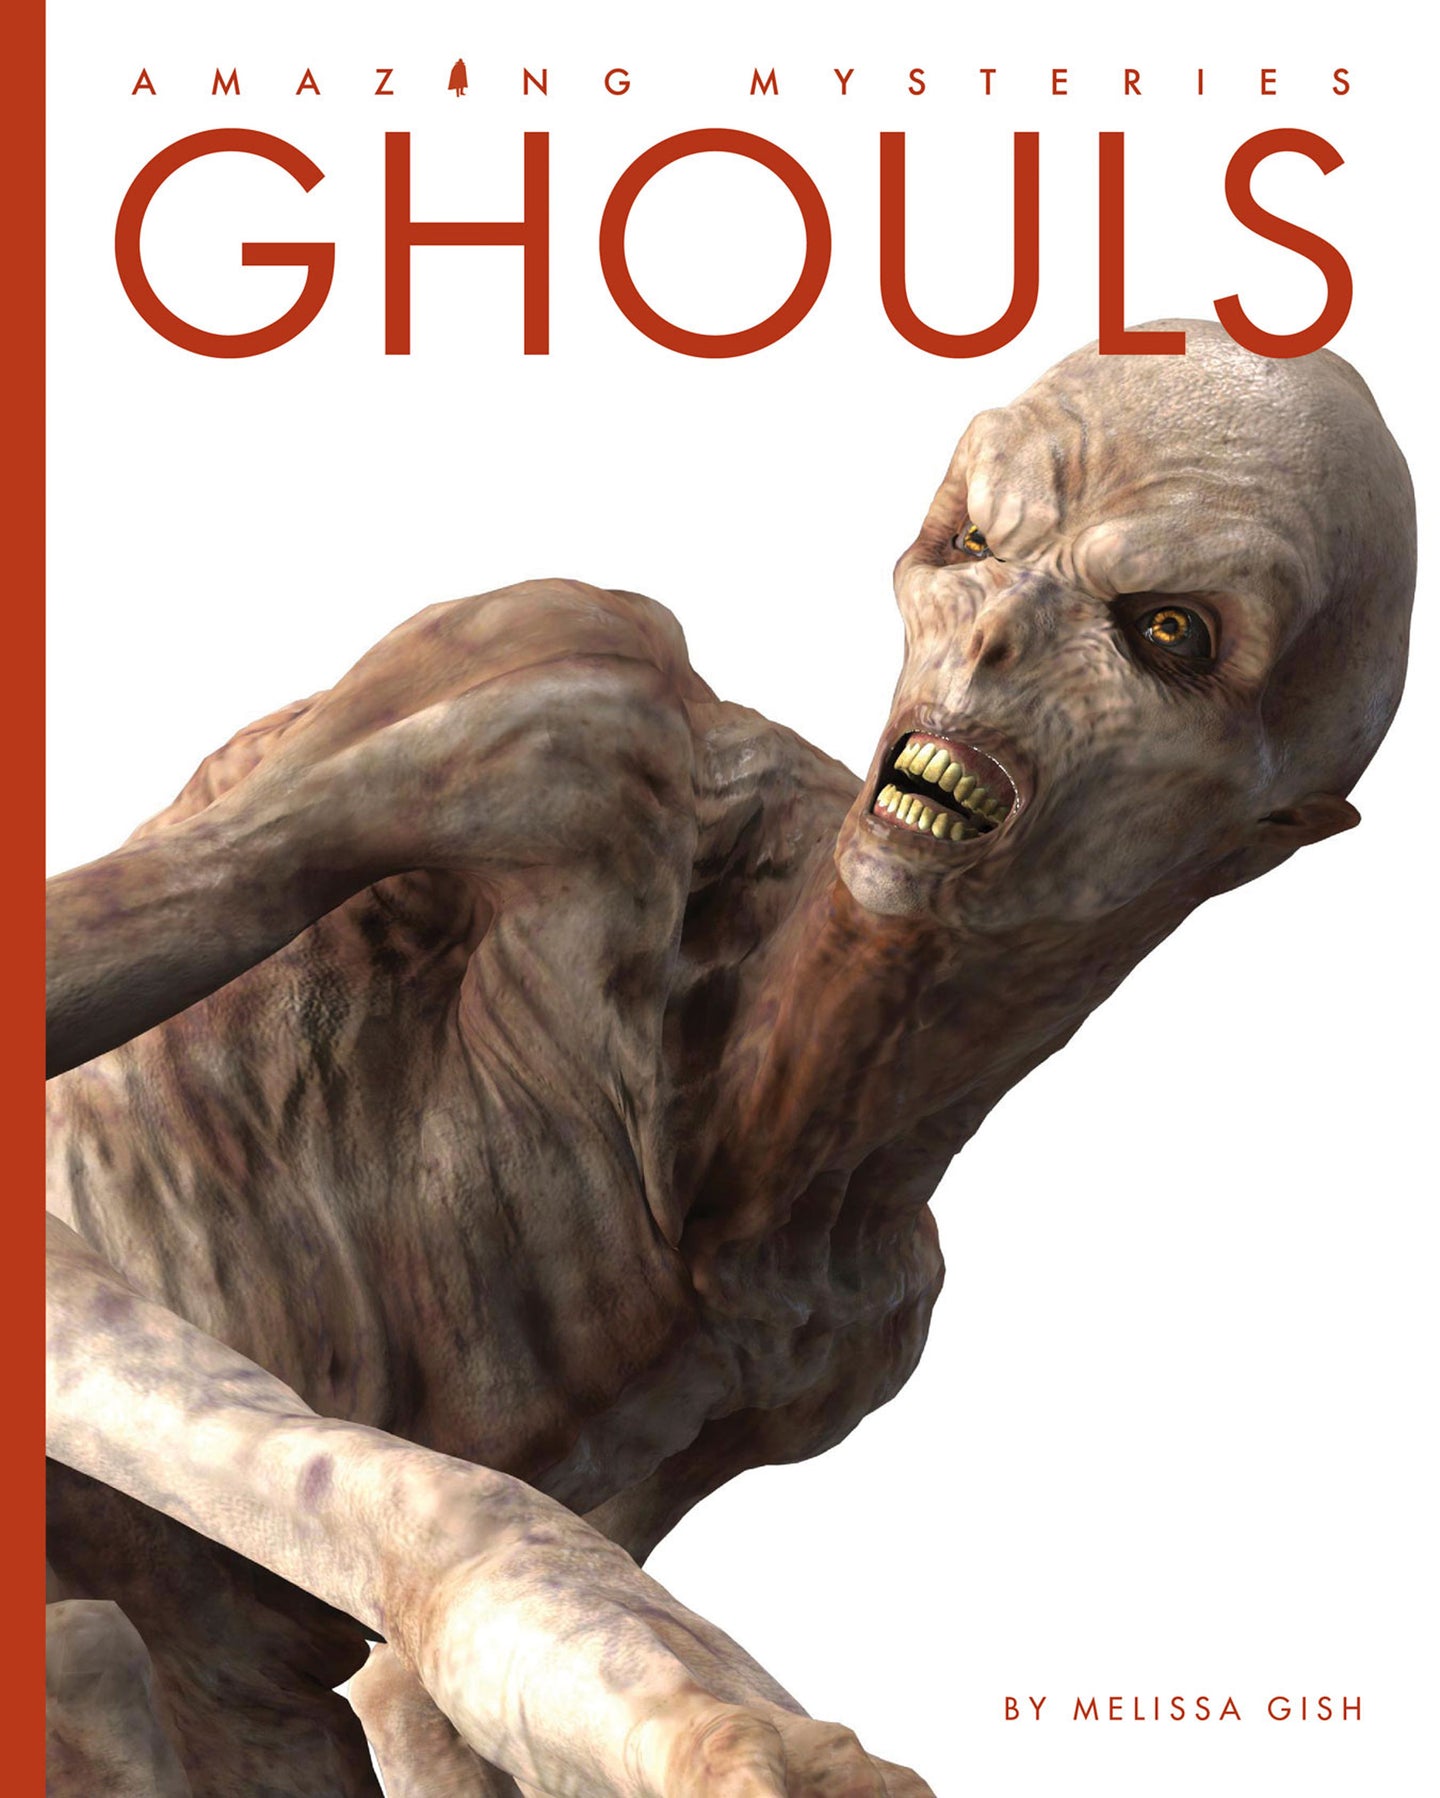 Amazing Mysteries: Ghouls